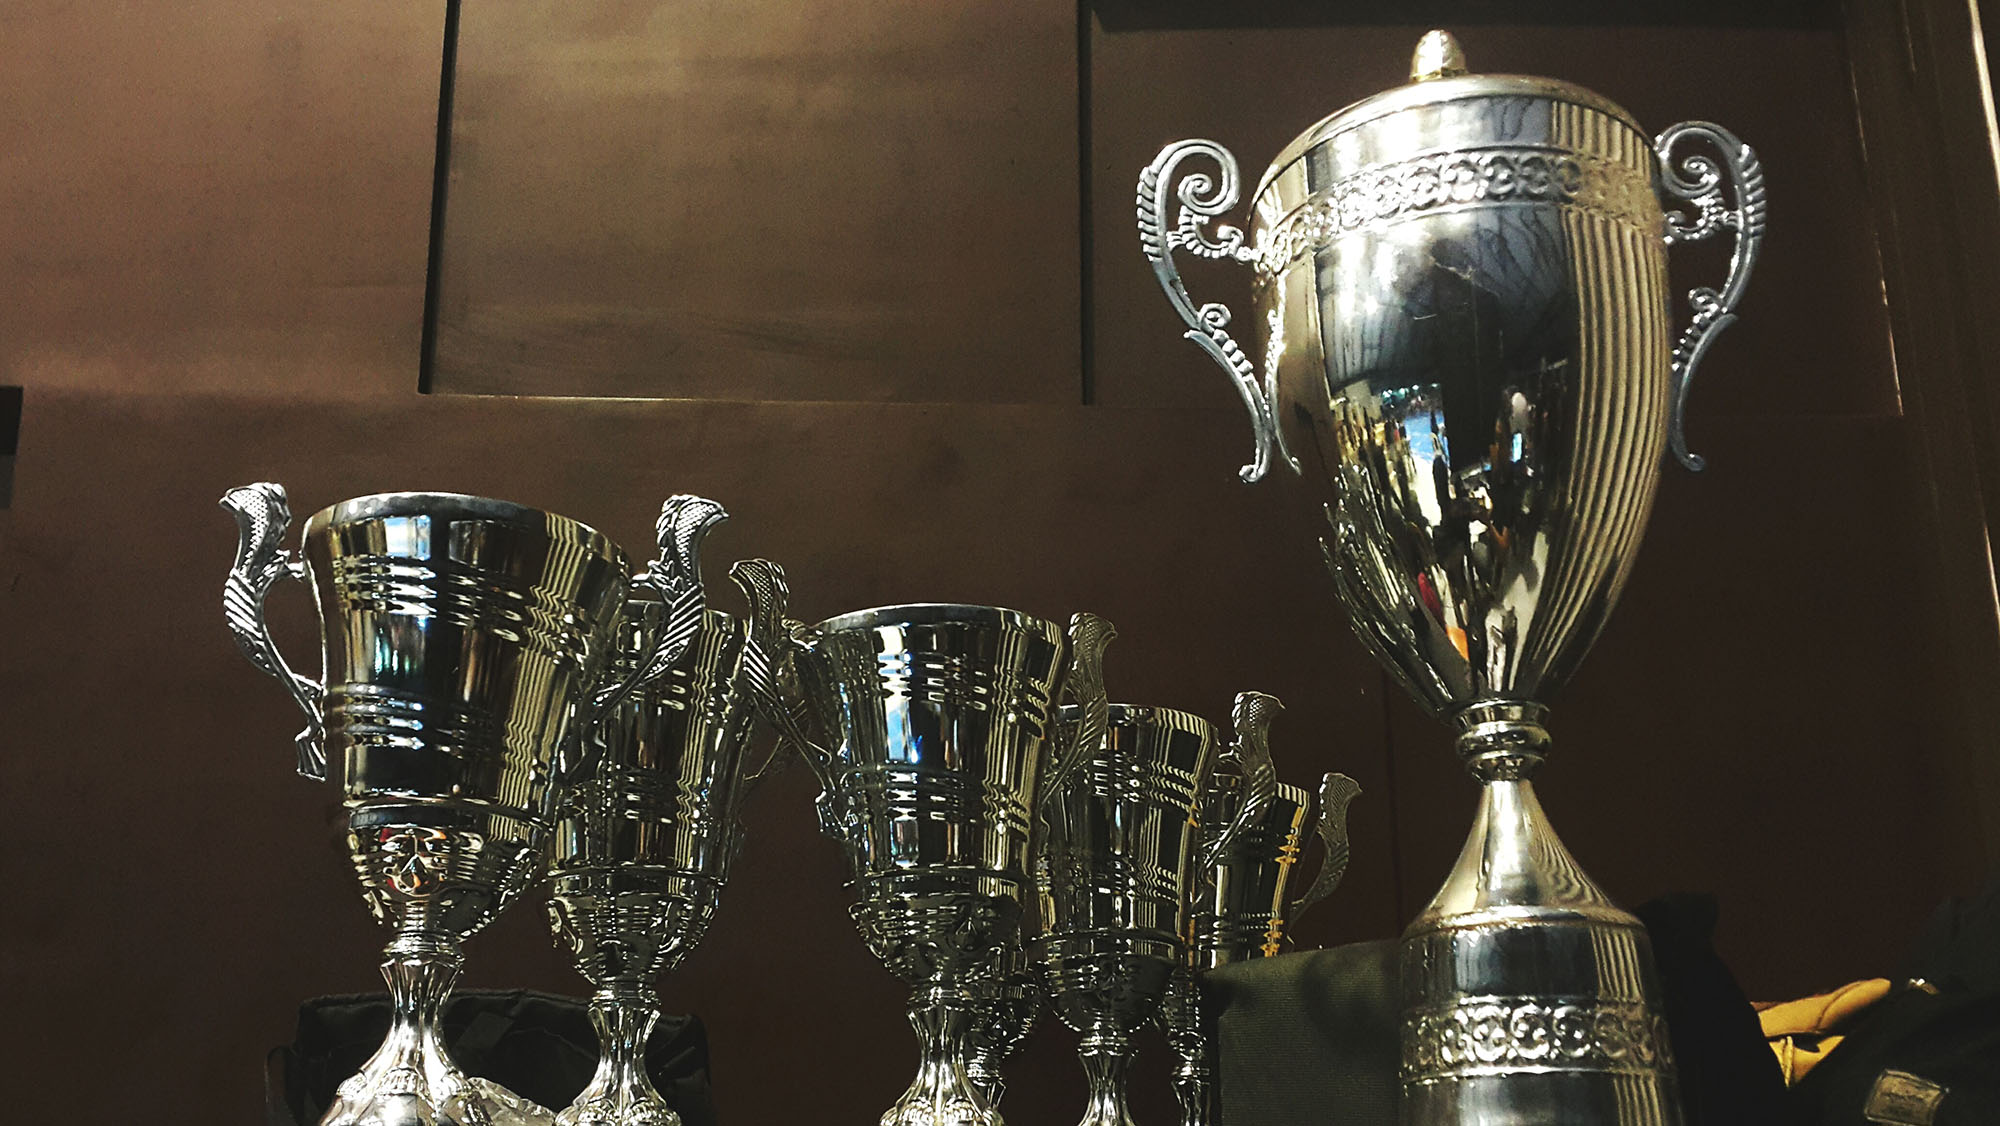 A row of trophies against a wood panel wall